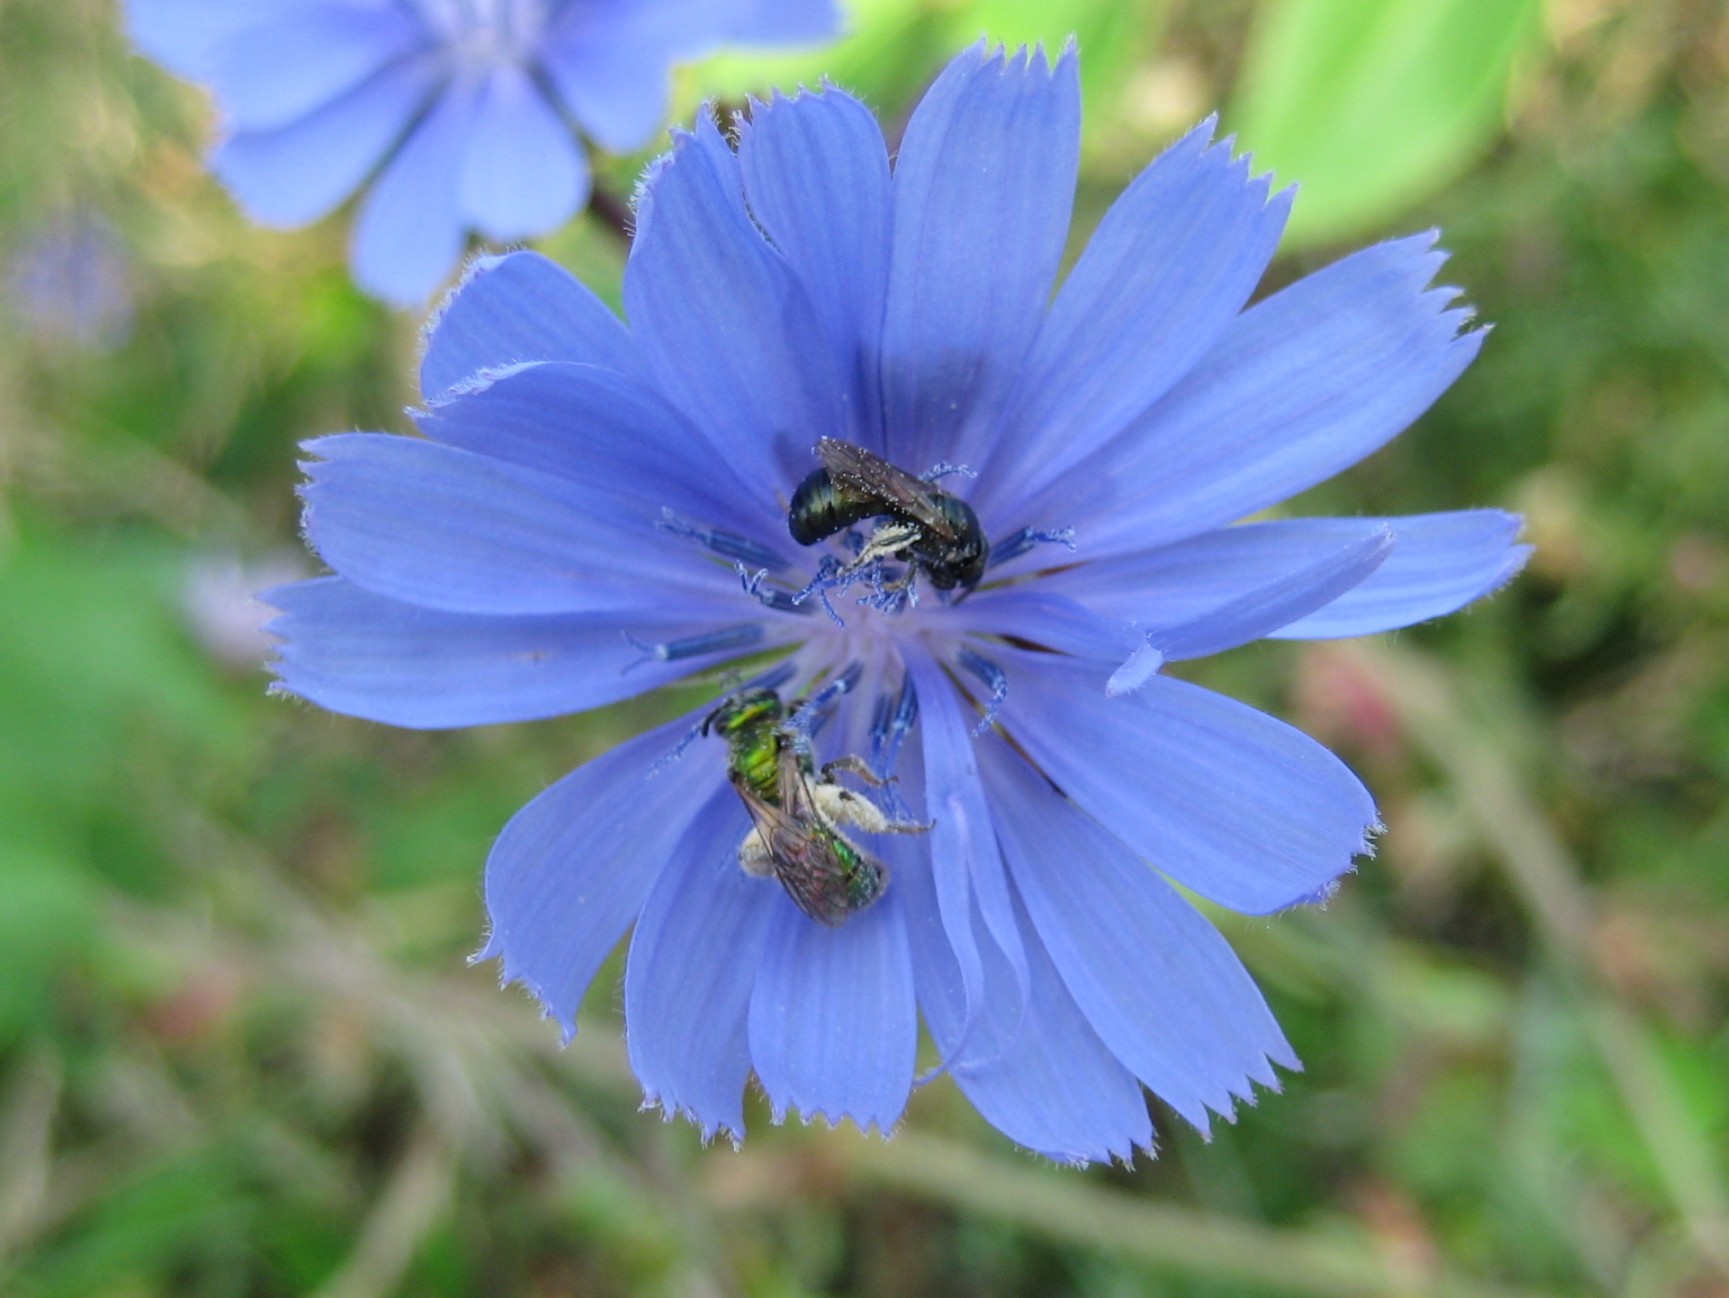 Solitary Bees on Chicory